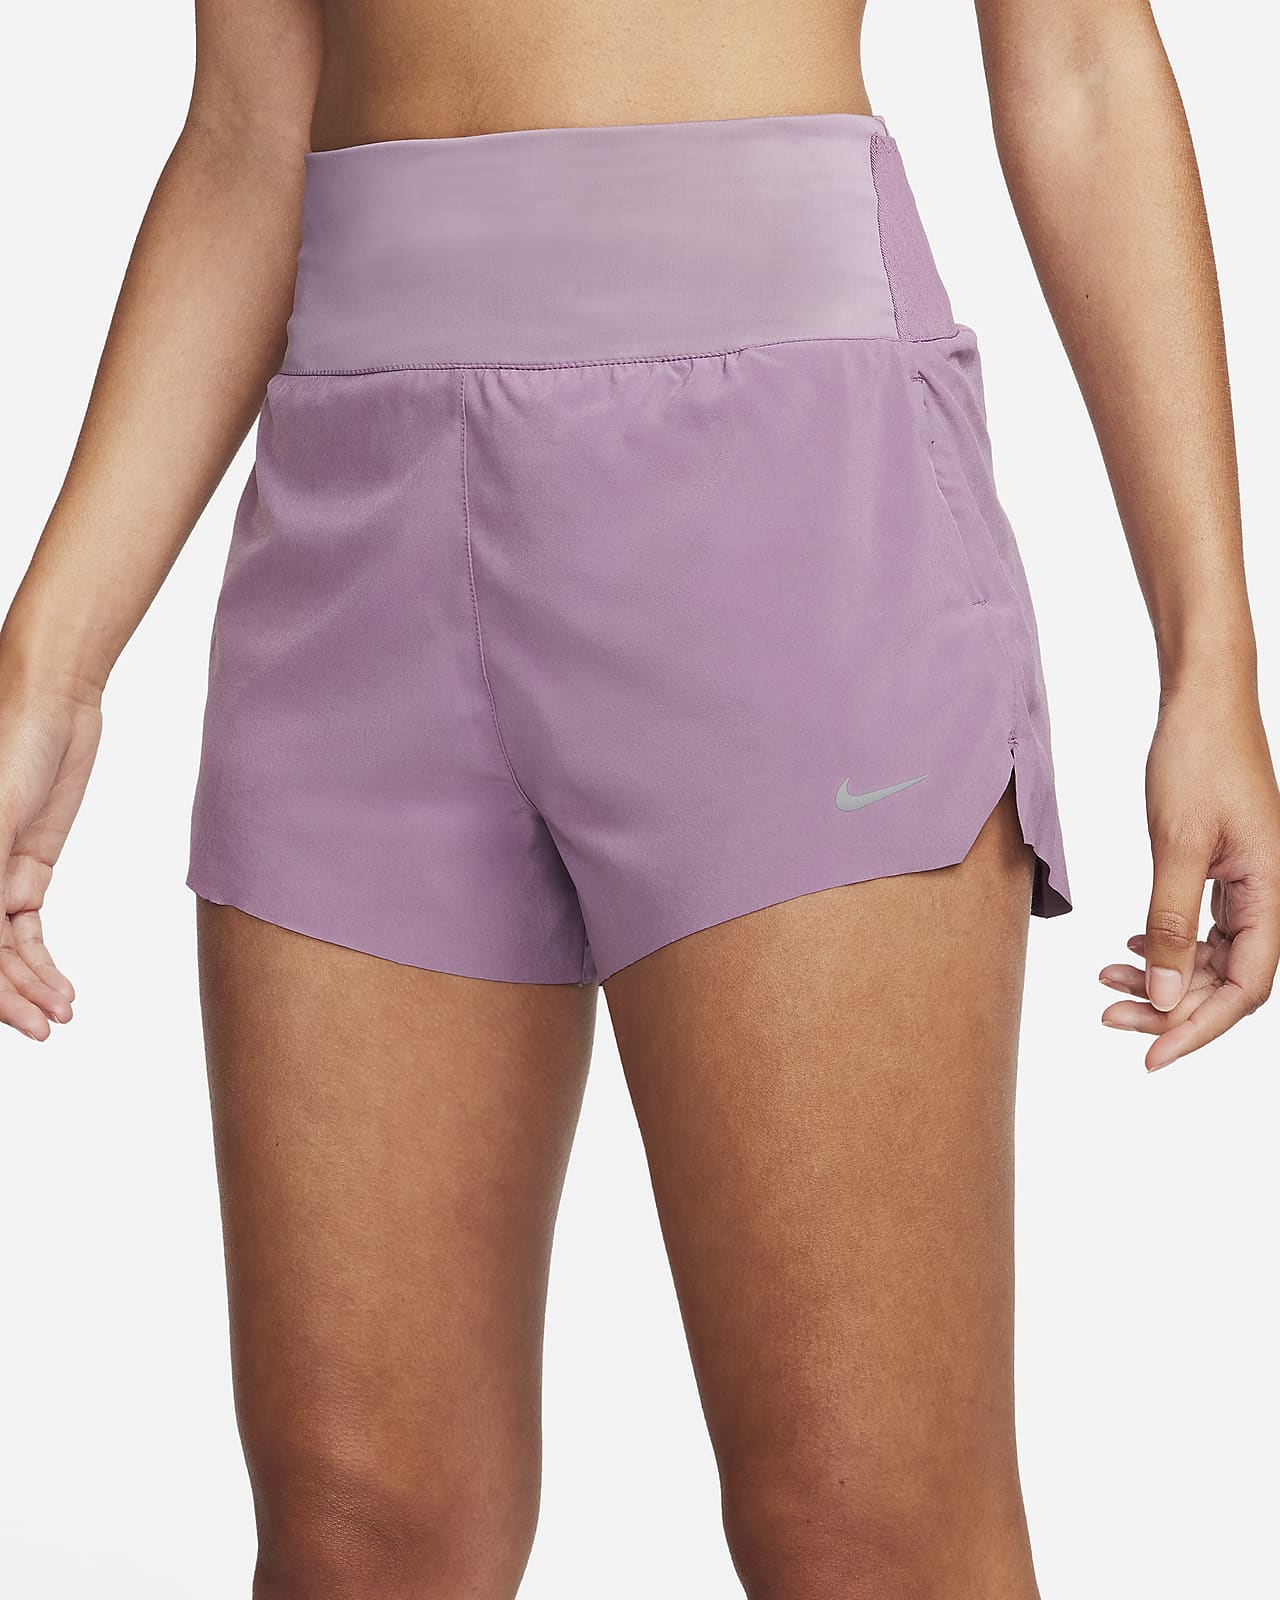 NWT DSG Women's 3” High Rise Waistband Relaxed Fit Shorts Lilac Size Small